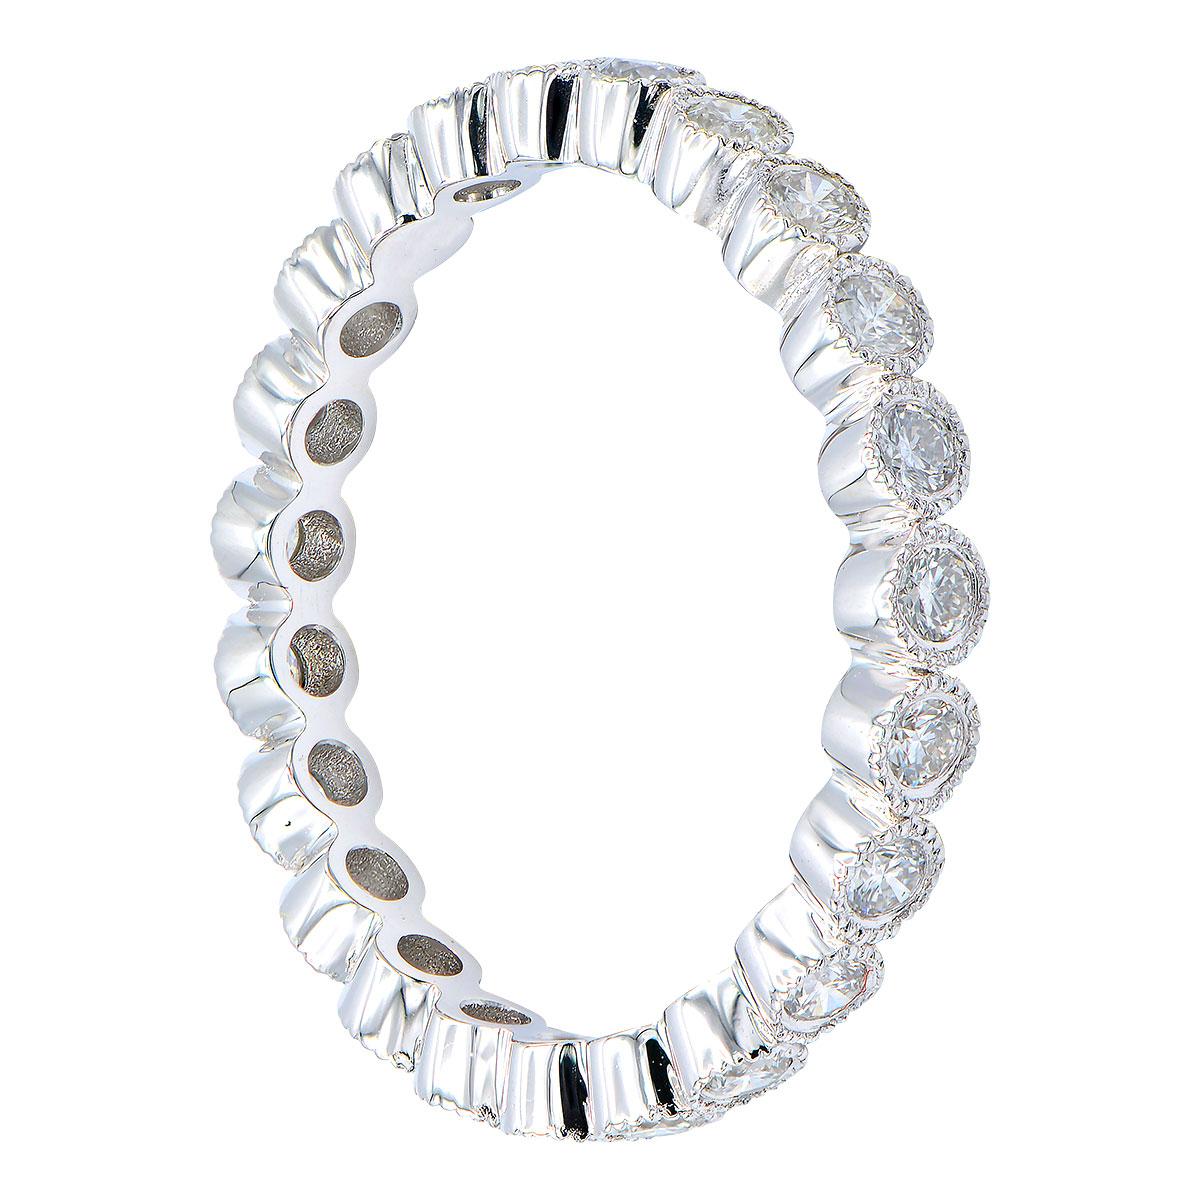 This beautiful eternity band has 23 round VS2, G color diamonds totaling 0.42ct that are set in 1.9 grams of 18 karat white gold. The diamonds go all the way around the band and are surrounded by beautiful goldwork attaching them together. This ring